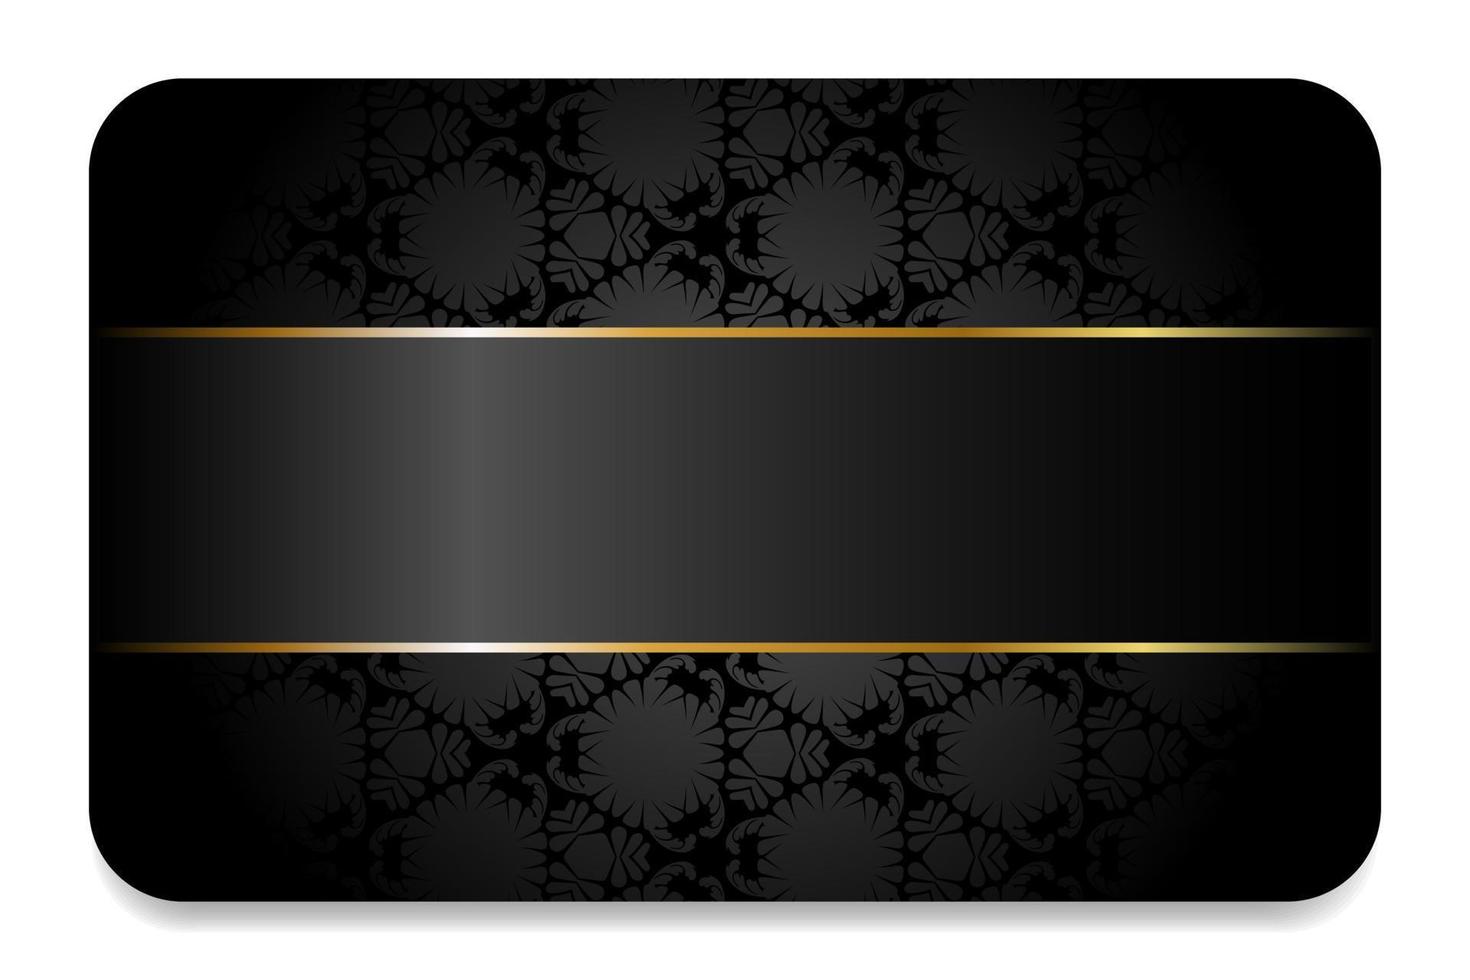 Premium business card gray and black with gold elements.Premium card with vintage pattern. Business card. Modern creative template. Sale banner. vector